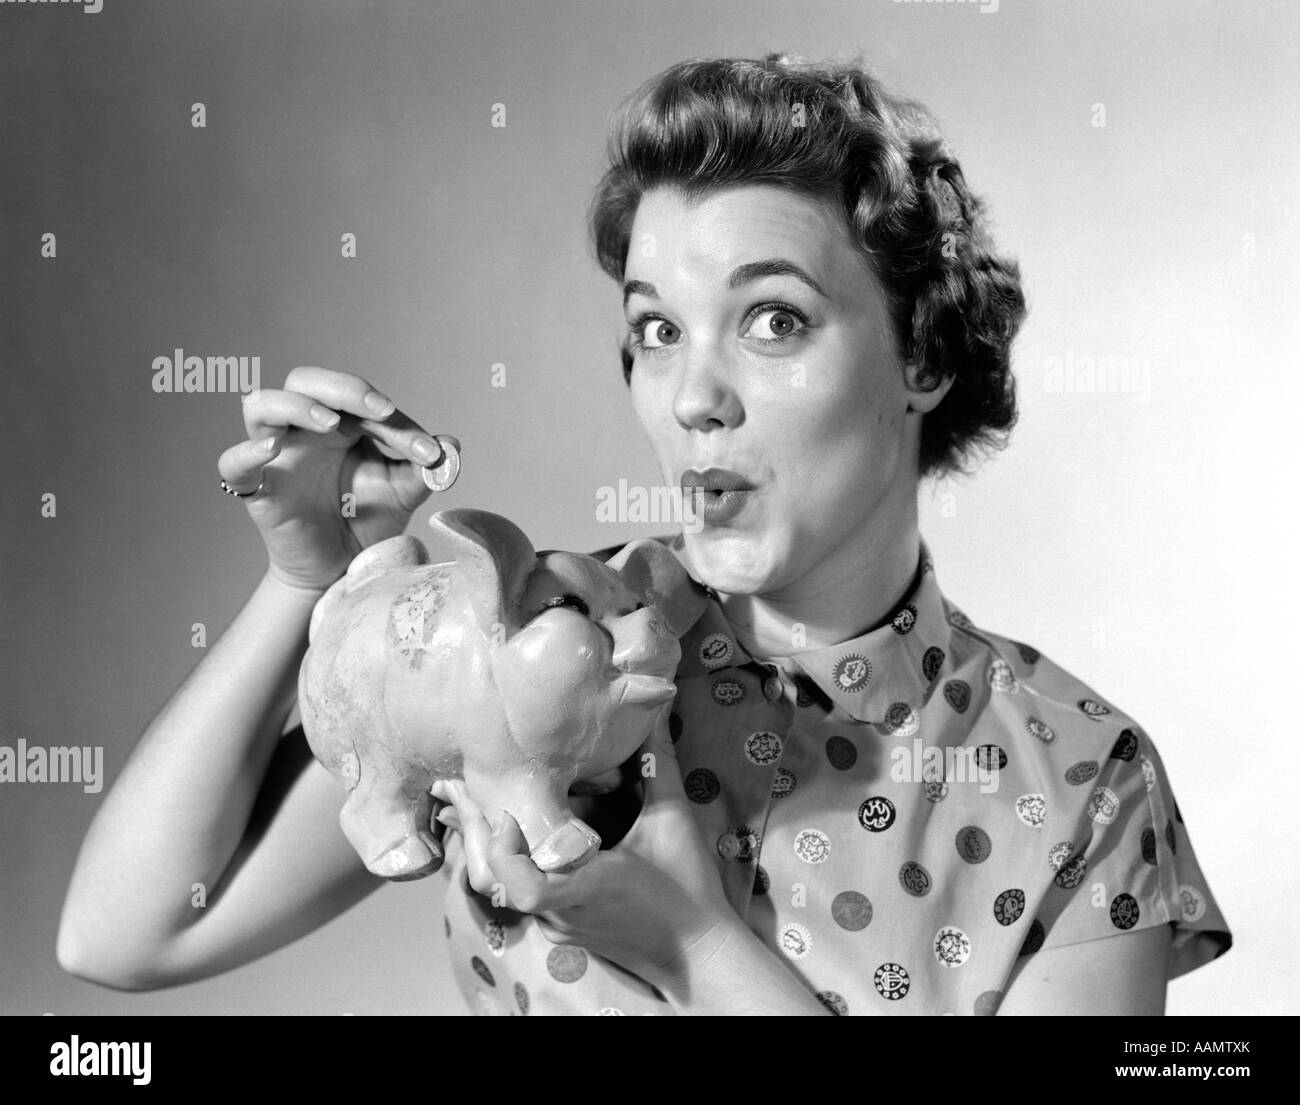 1950s WOMAN LOOKING AT CAMERA DROPPING MONEY IN PIGGY BANK Stock Photo